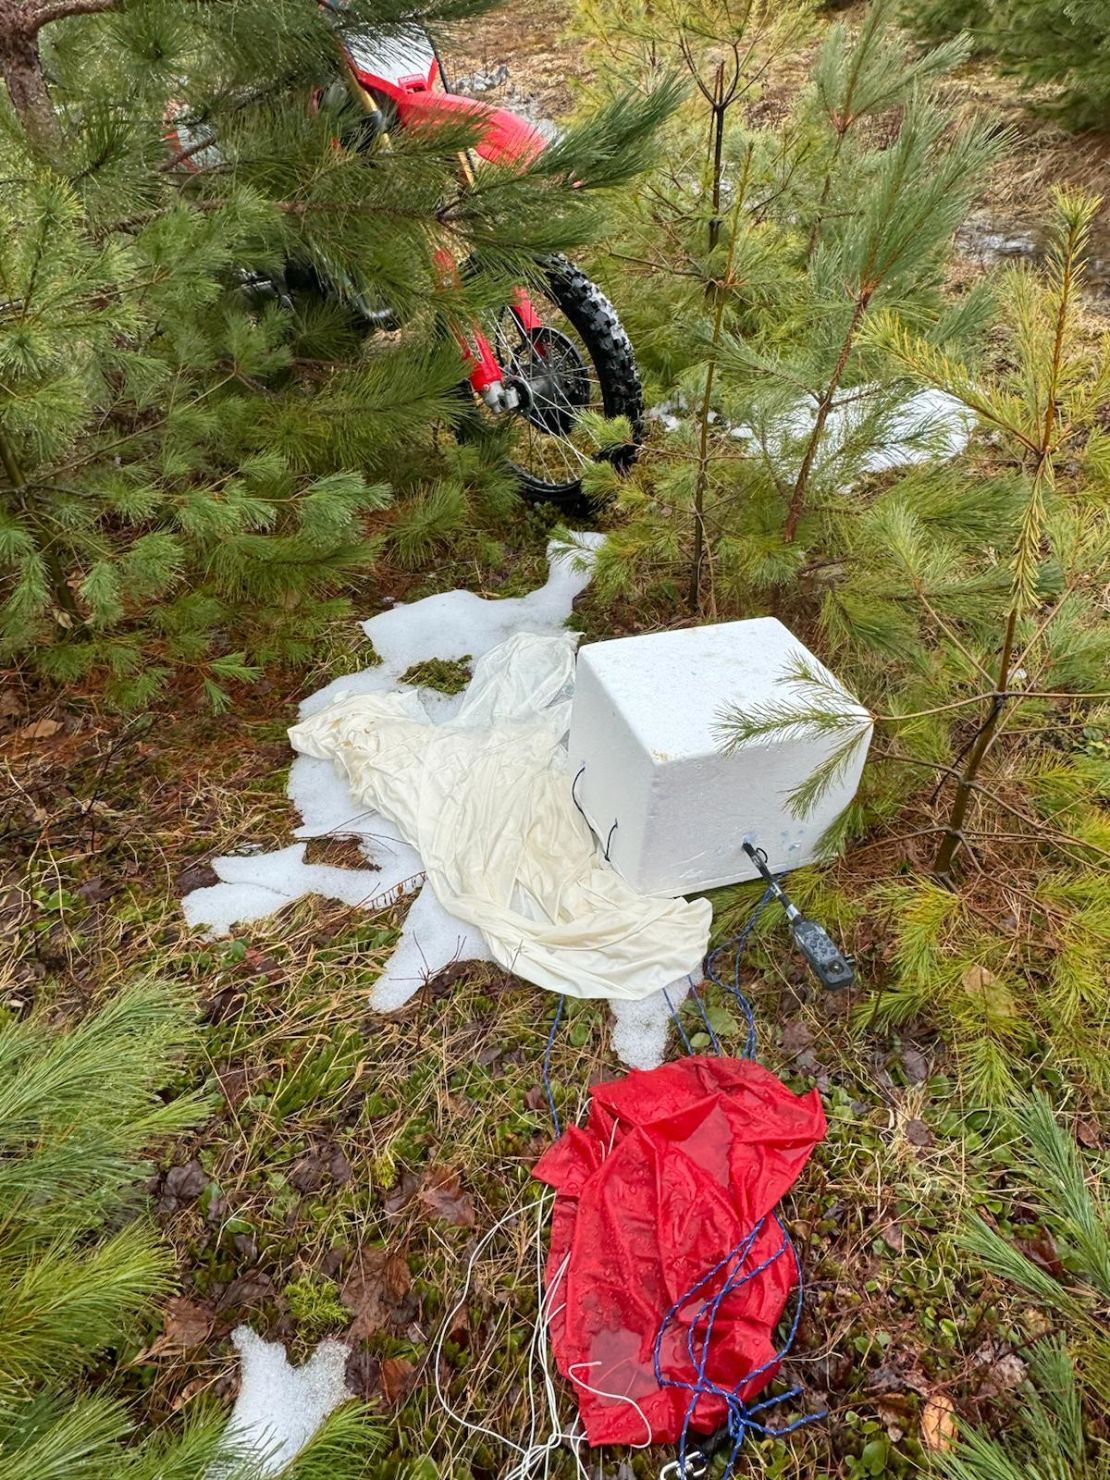 The weather balloon landed 552 miles (888 kilometers) from the launch site in Green Hills Preserve in North Conway, New Hampshire, and was retrieved with the help of Joshua Gilmore and Cynthia Gilmore.